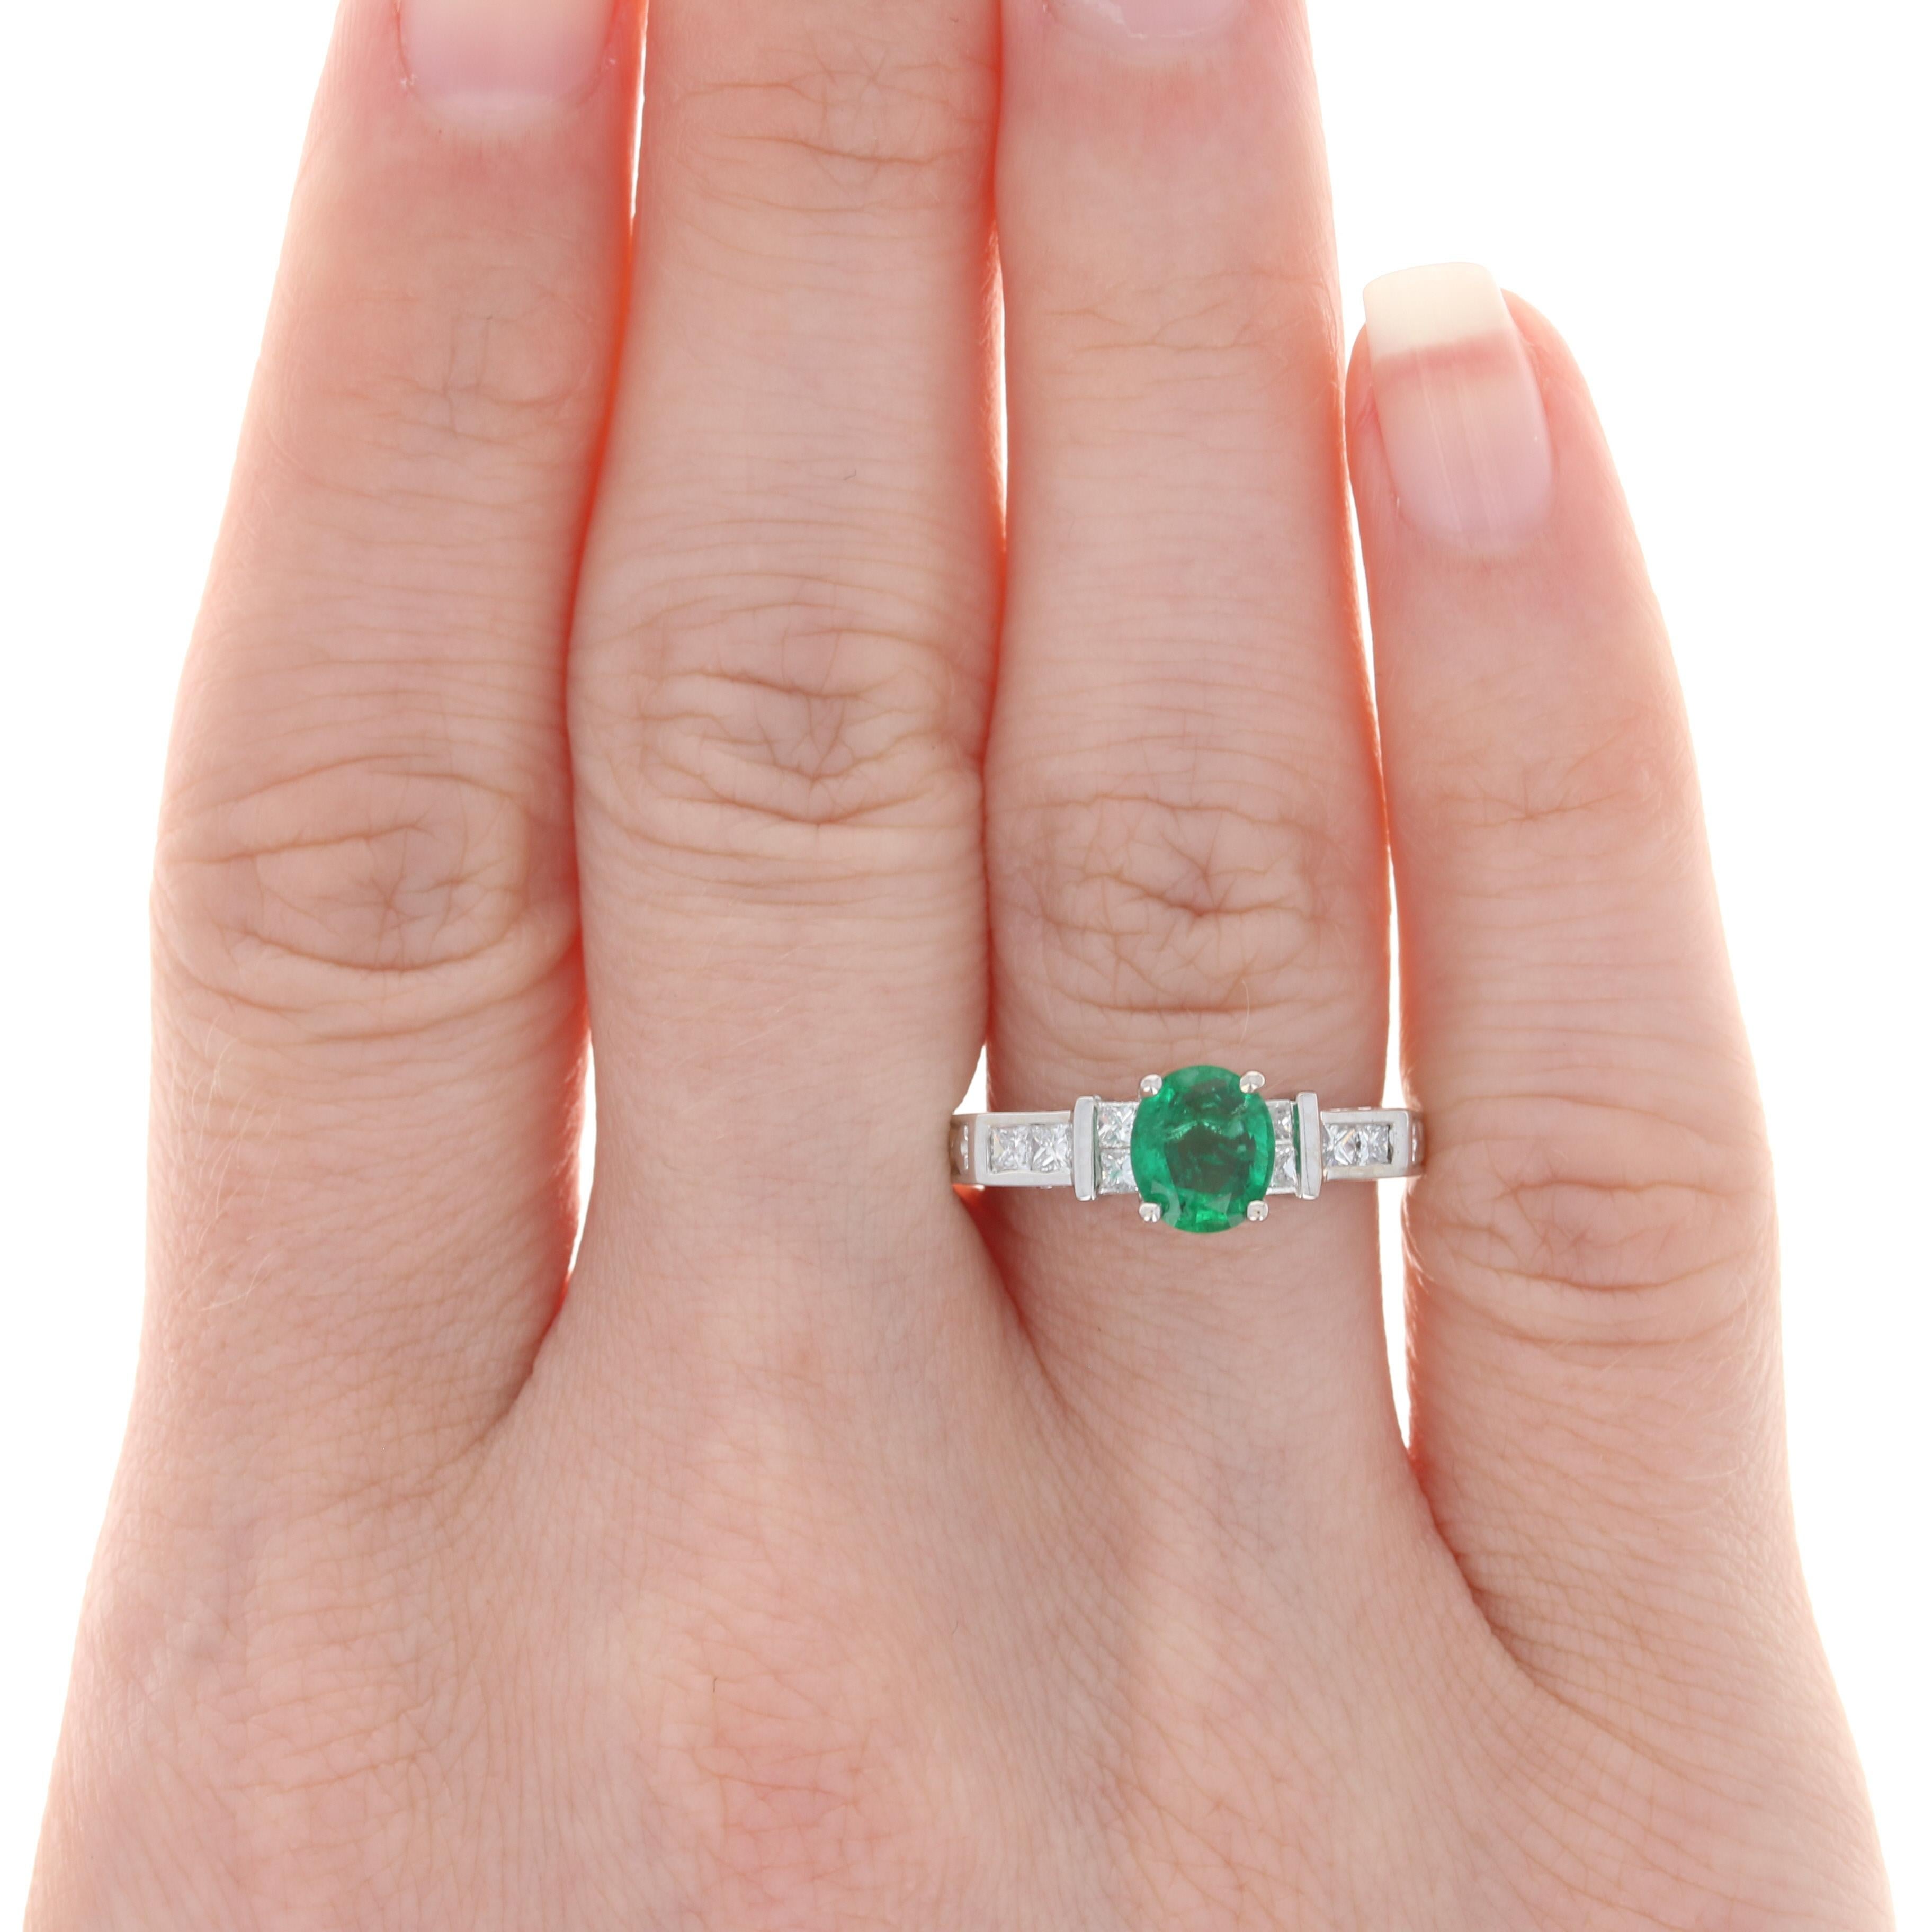 Size: 6 1/2

Metal Content: 18k White Gold

Stone Information: 
Genuine Emerald
Treatment: Oiling
Carat: .97ct
Cut: Oval
Color: Green
Size: 6.8mm X 5.9mm

Natural Diamonds
Carats: .32ctw
Cut: Princess 
Color: G - H
Clarity: SI1 - SI2

Total Carats: